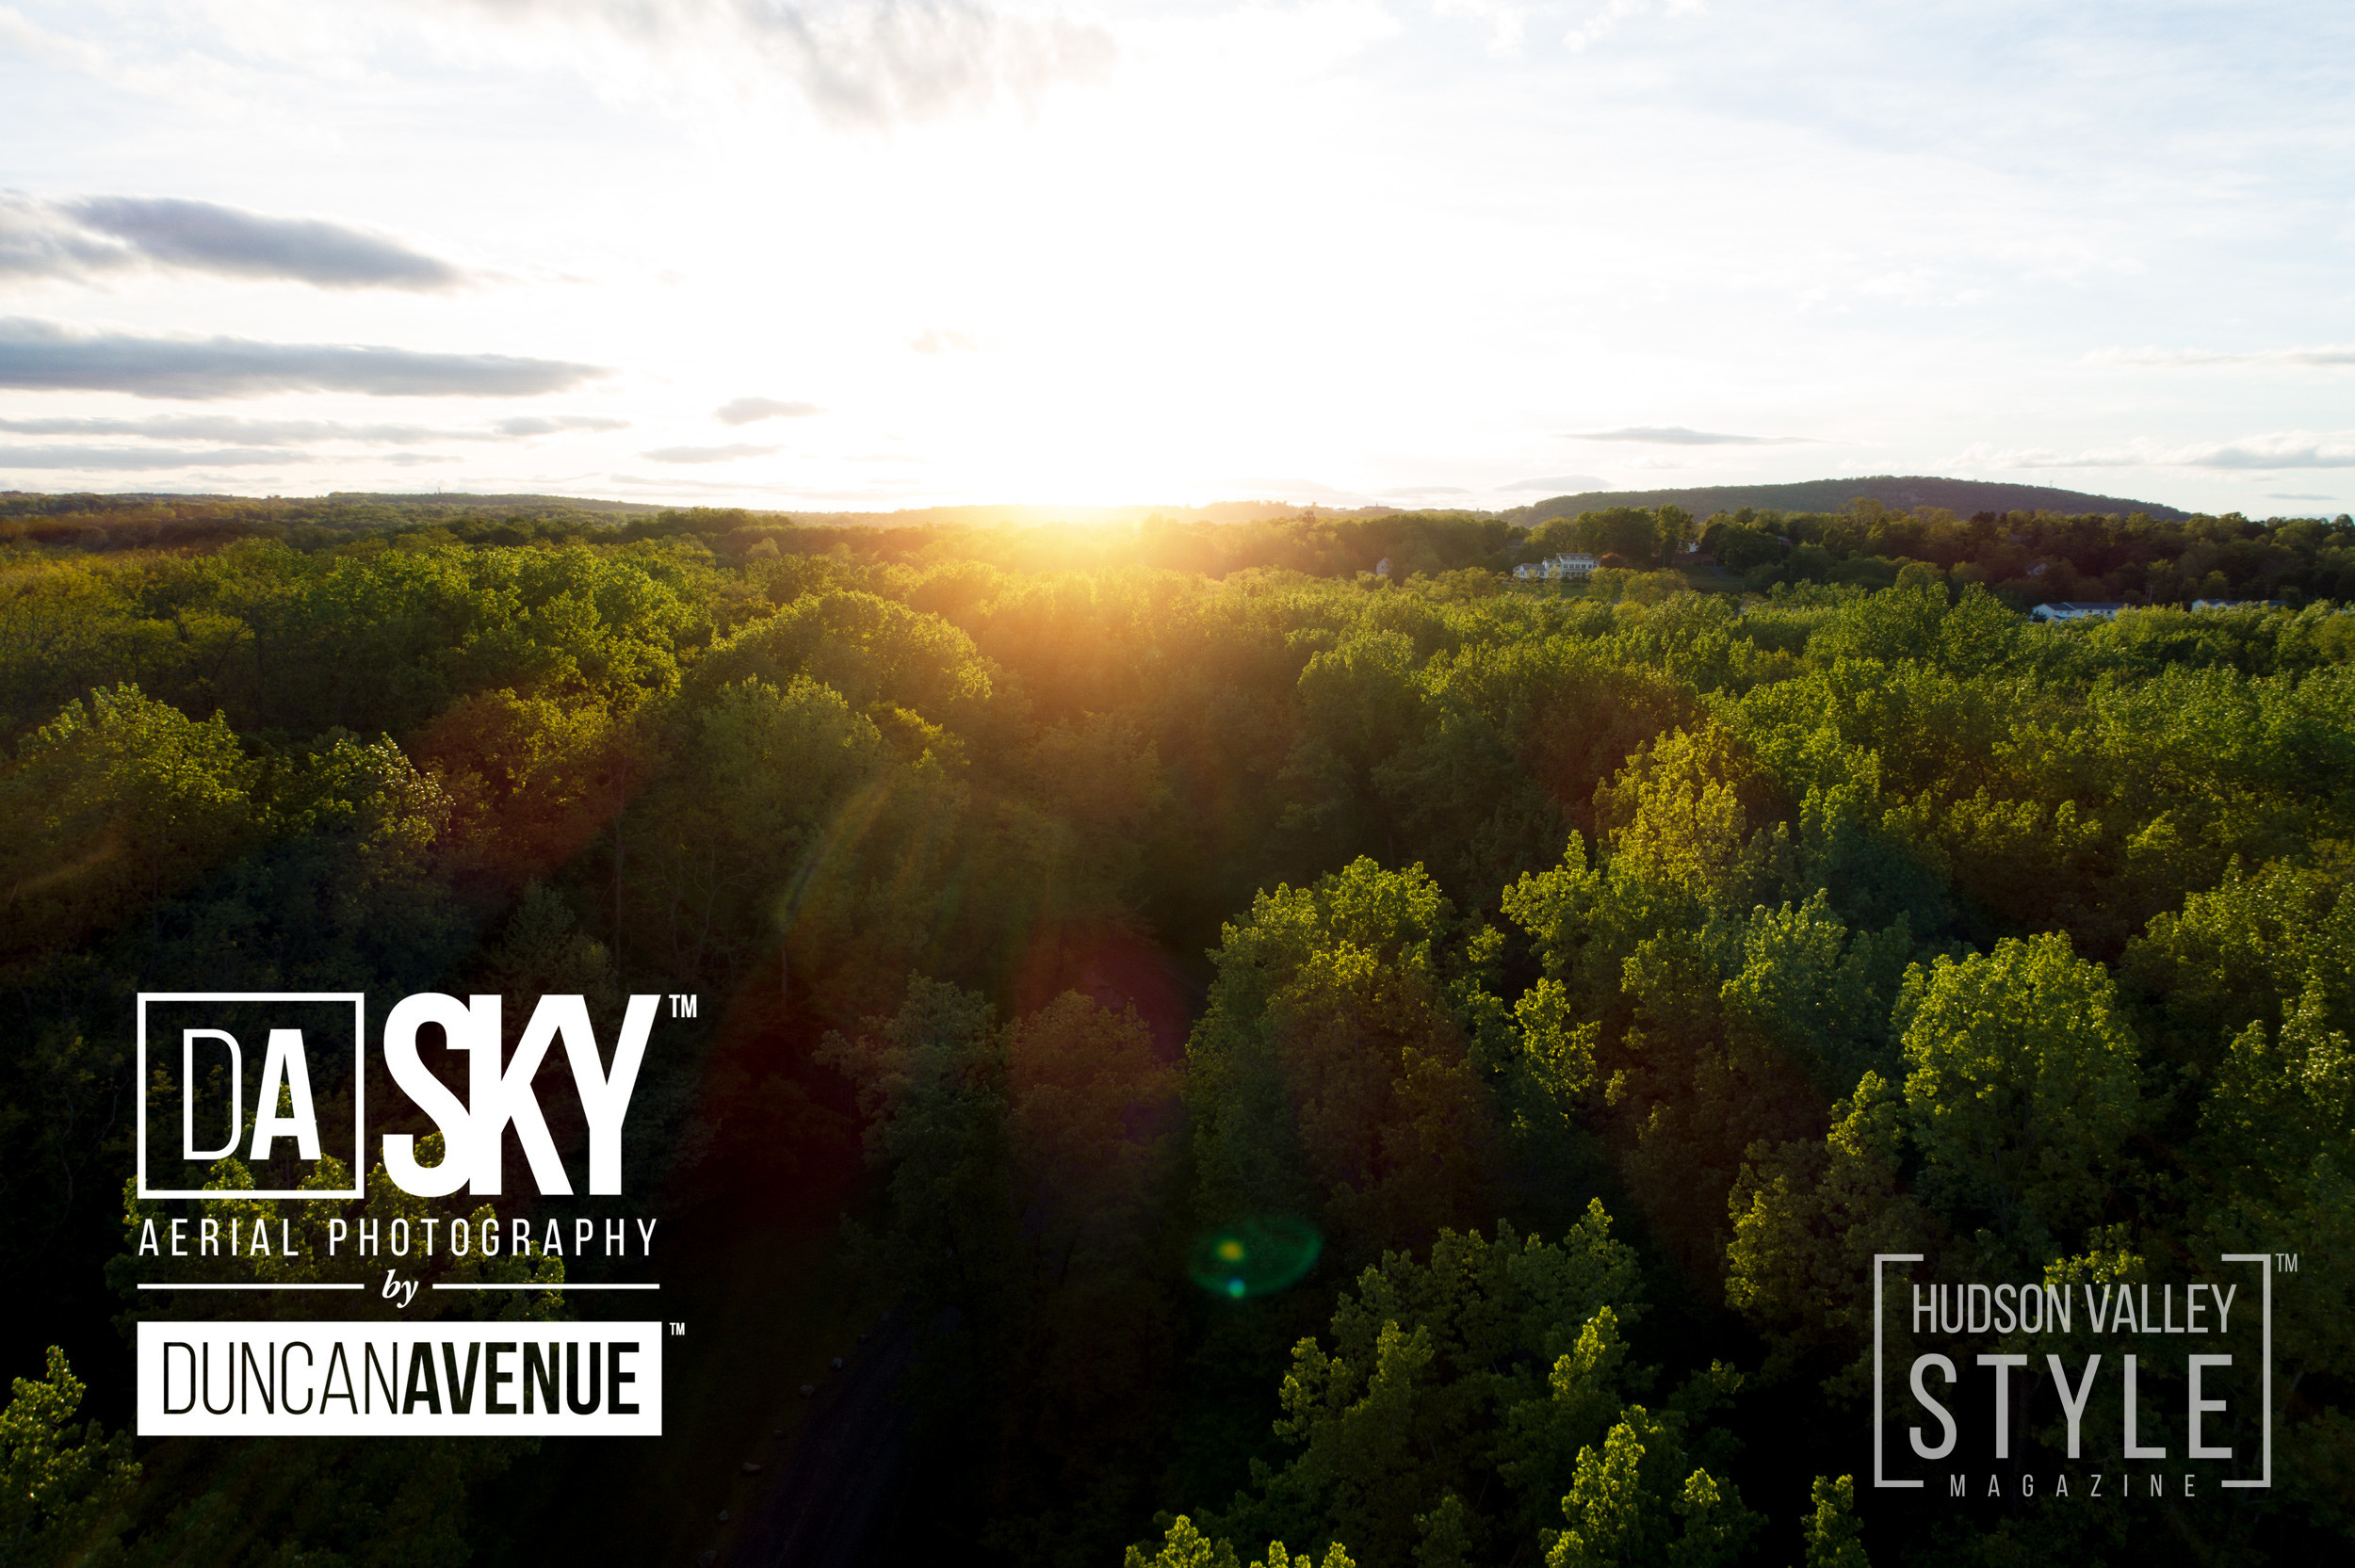 DA SKY - Aerial Real Estate Photography in Hudson Valley, New York